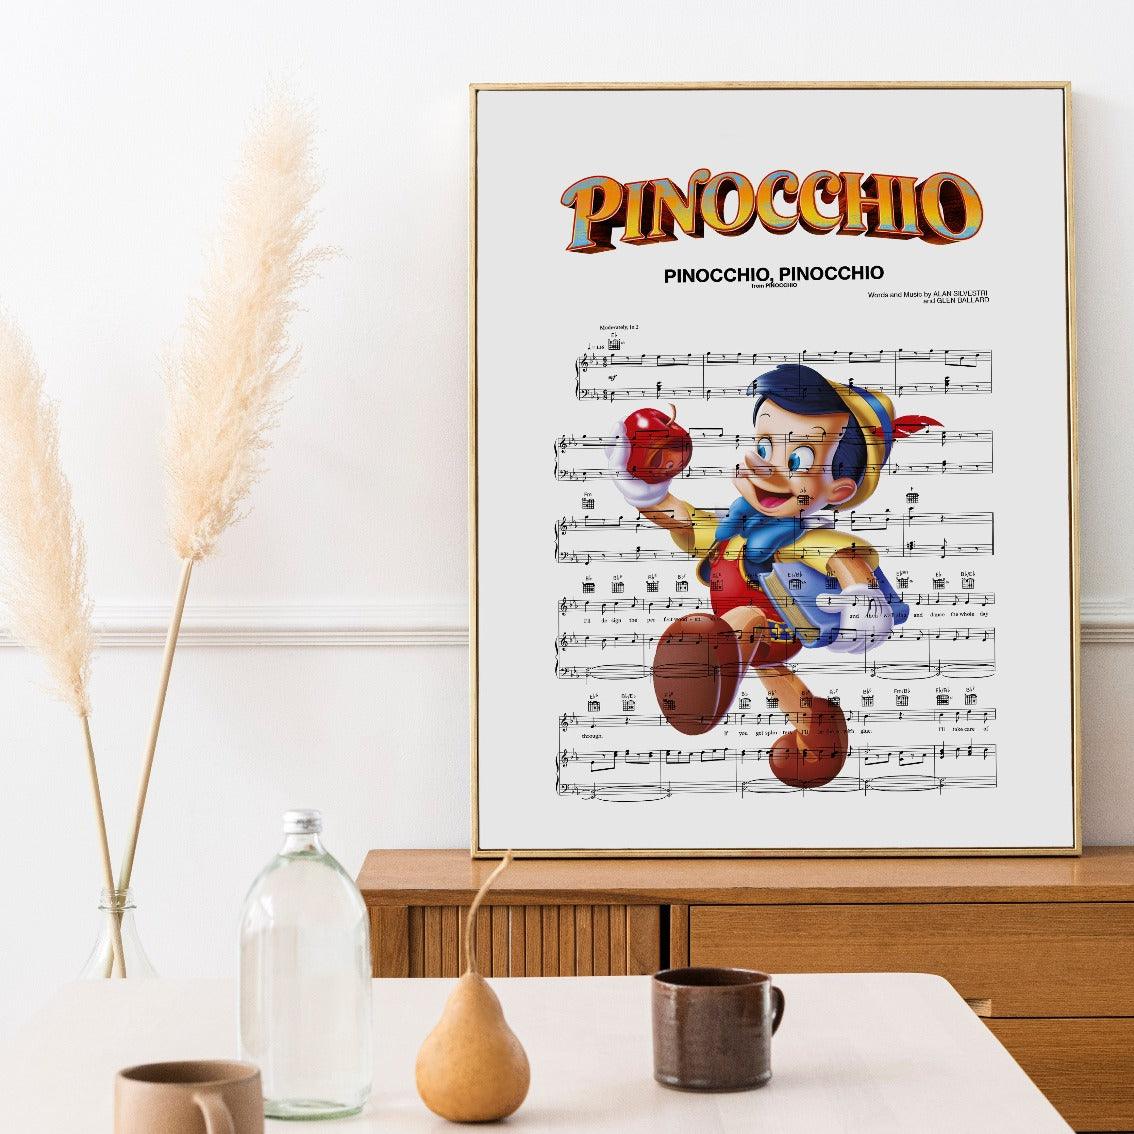 PINOCCHIO is a new and unique way to display your favorite song lyrics. Printed on high quality paper and framed in a black or white wooden frame, these unique prints will add a touch of personalization to your music-themed decor. The perfect gift for any music lover, PINOCCHIO combines your favorite song with beautiful artwork for a unique and stylish addition to your home.